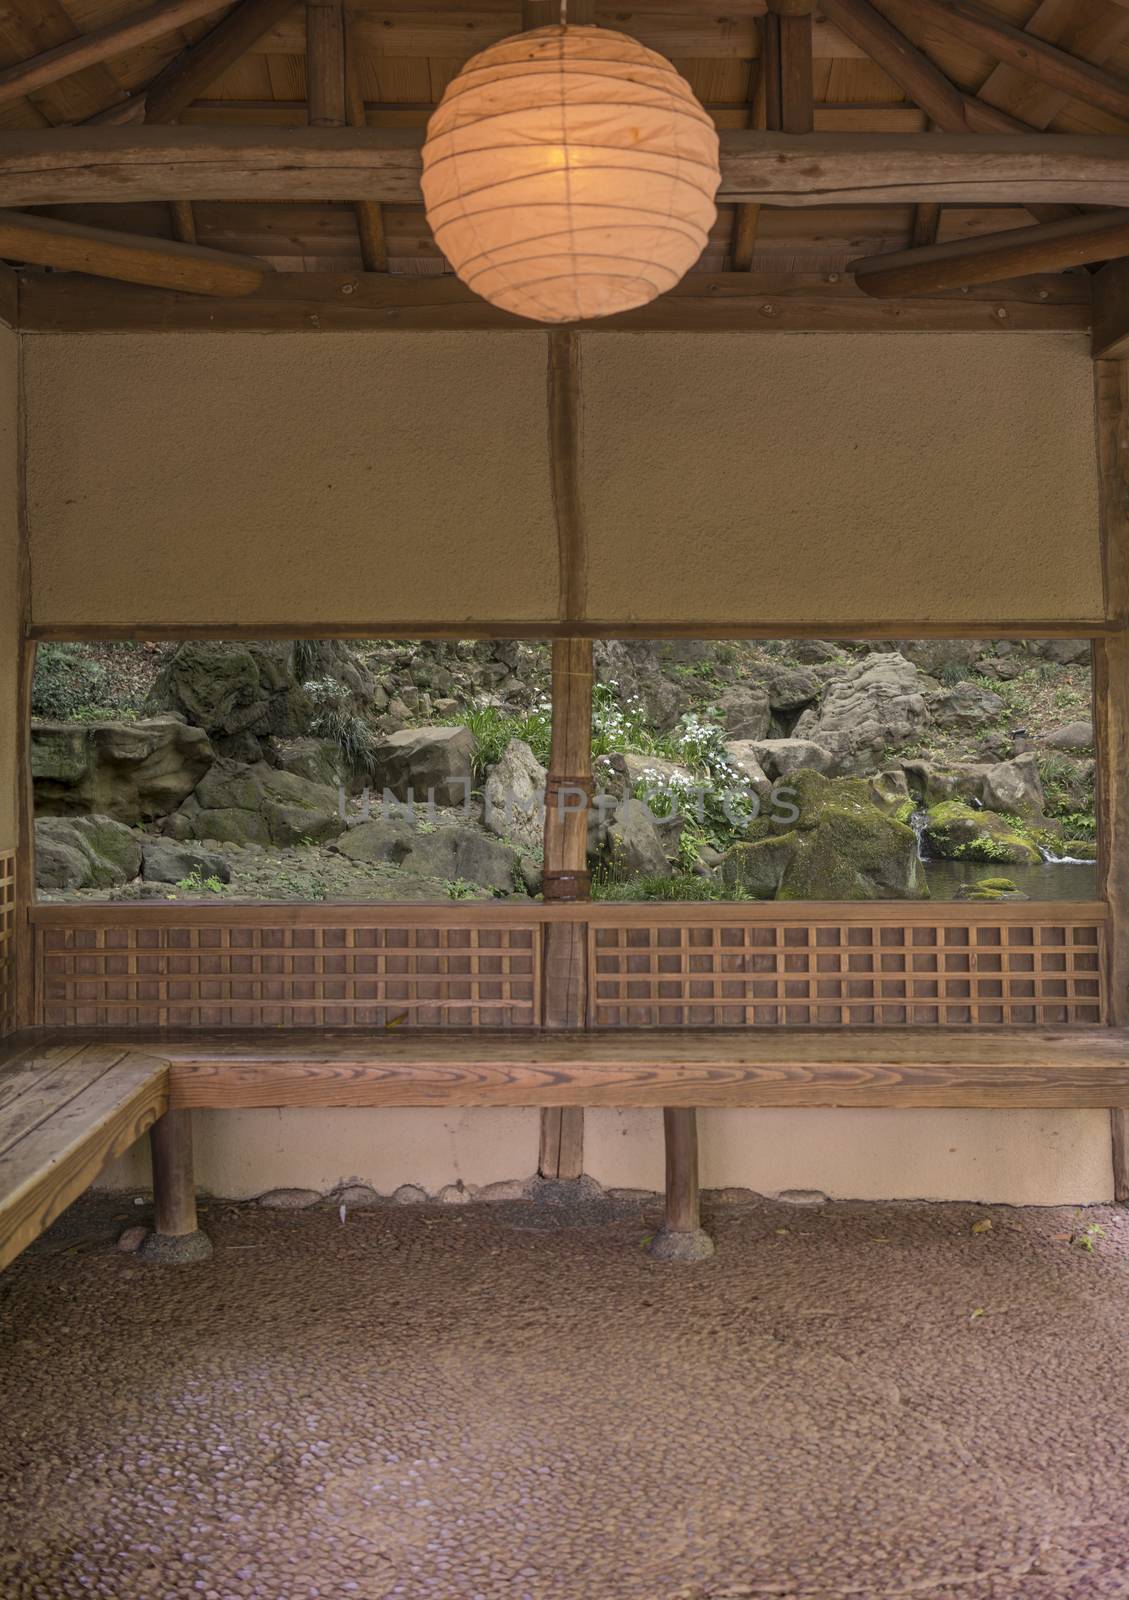 Takimi Japanese tea house lit by a lantern of washi paper overlooking a waterfall and stone islets with moss in the pond of Rikugien park garden in Bunkyo district, north of Tokyo. The park was created at the beginning of the 18th century.